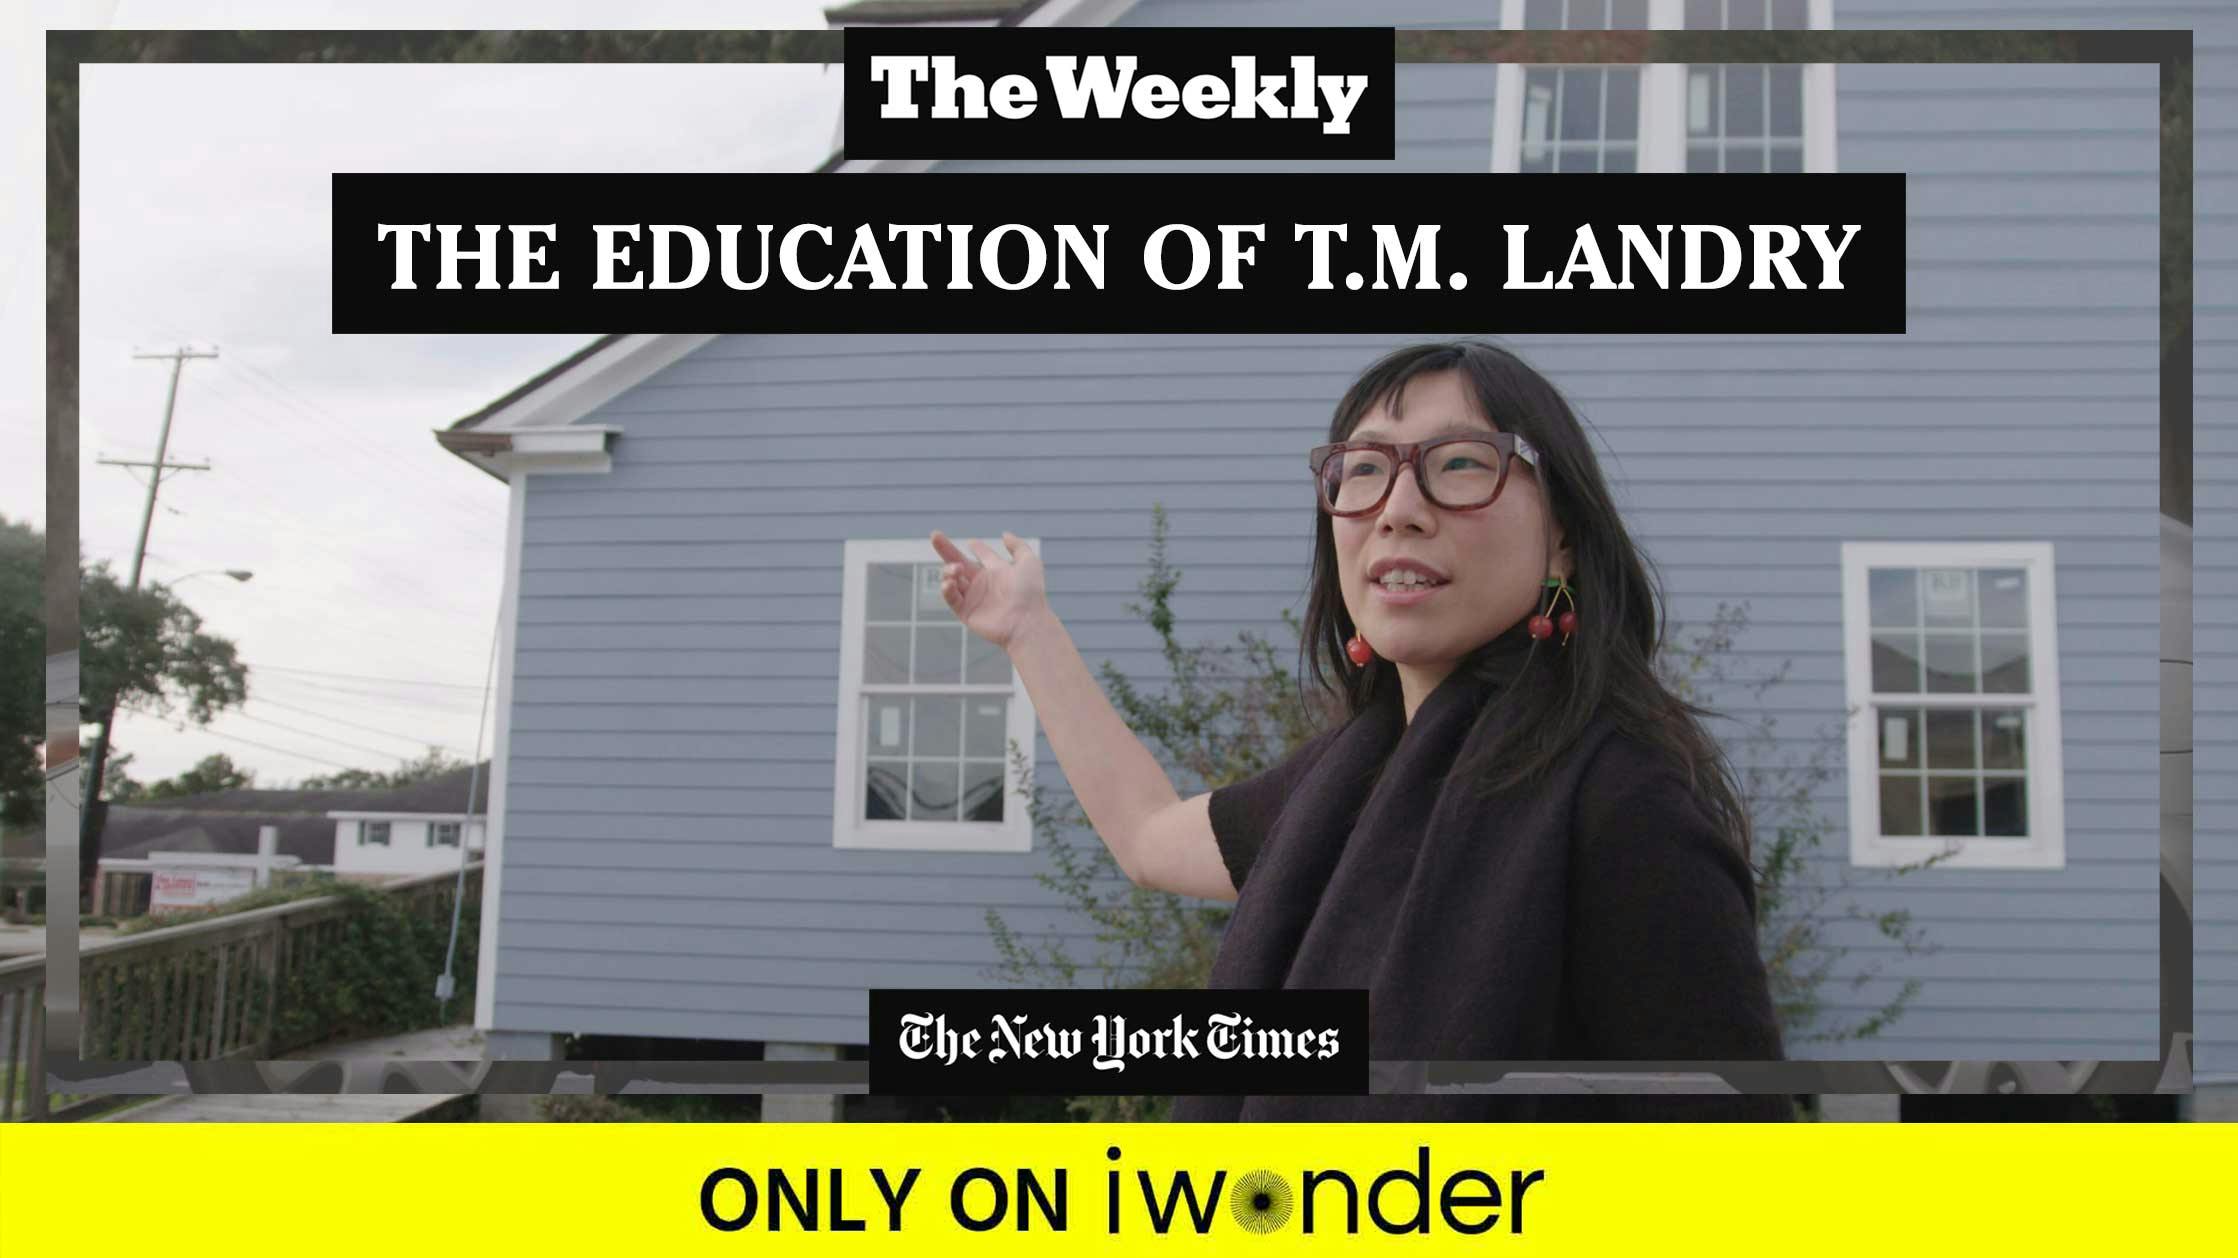 The Weekly: The Education of T.M. Landry